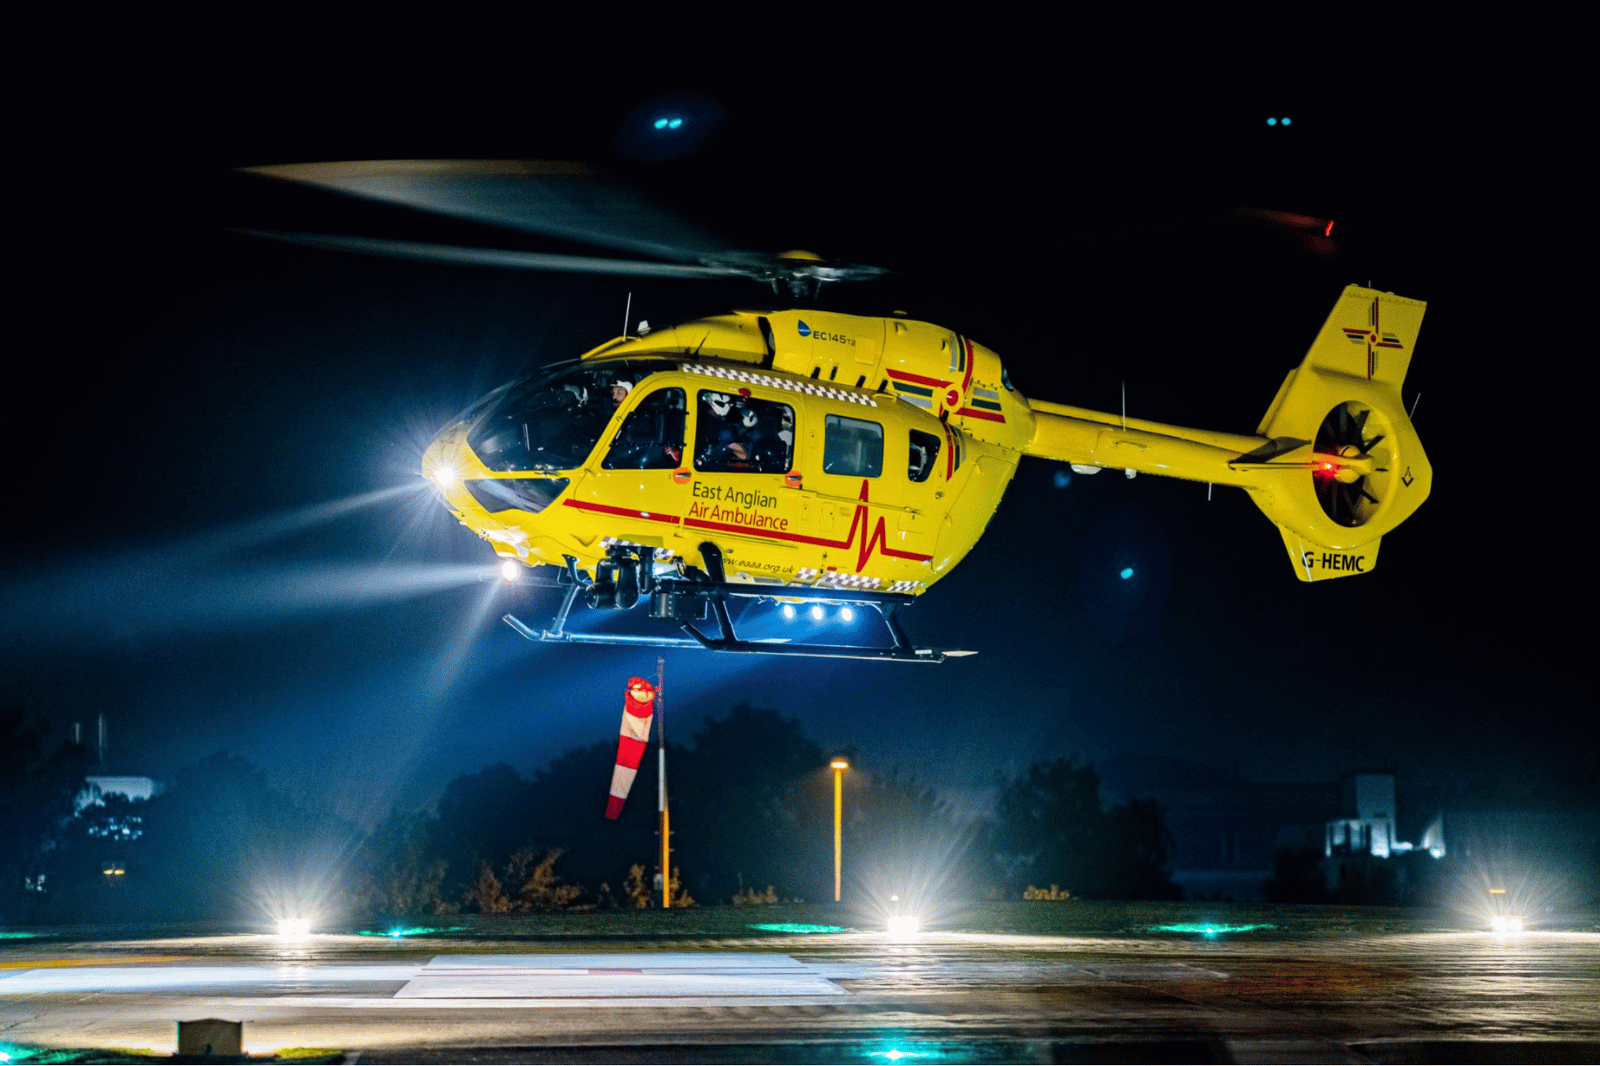 A yellow helicopter participating in the East Anglian Air Ambulance Raffle, flying at night.